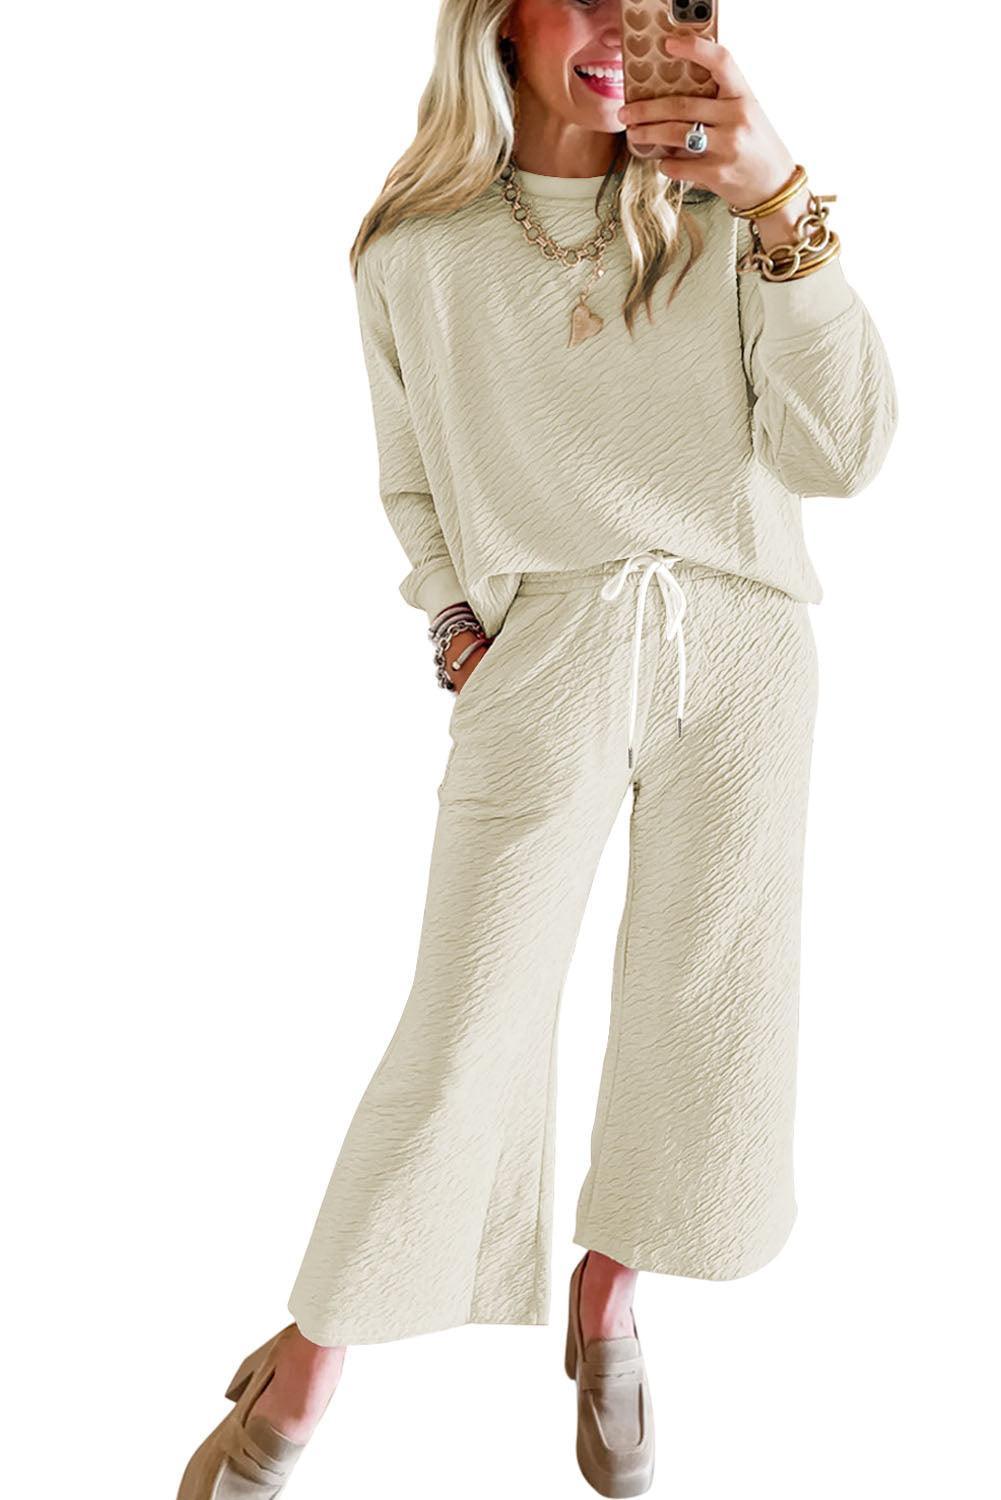 White Solid Color Textured Long Sleeve Top and Pants Set - Ninonine